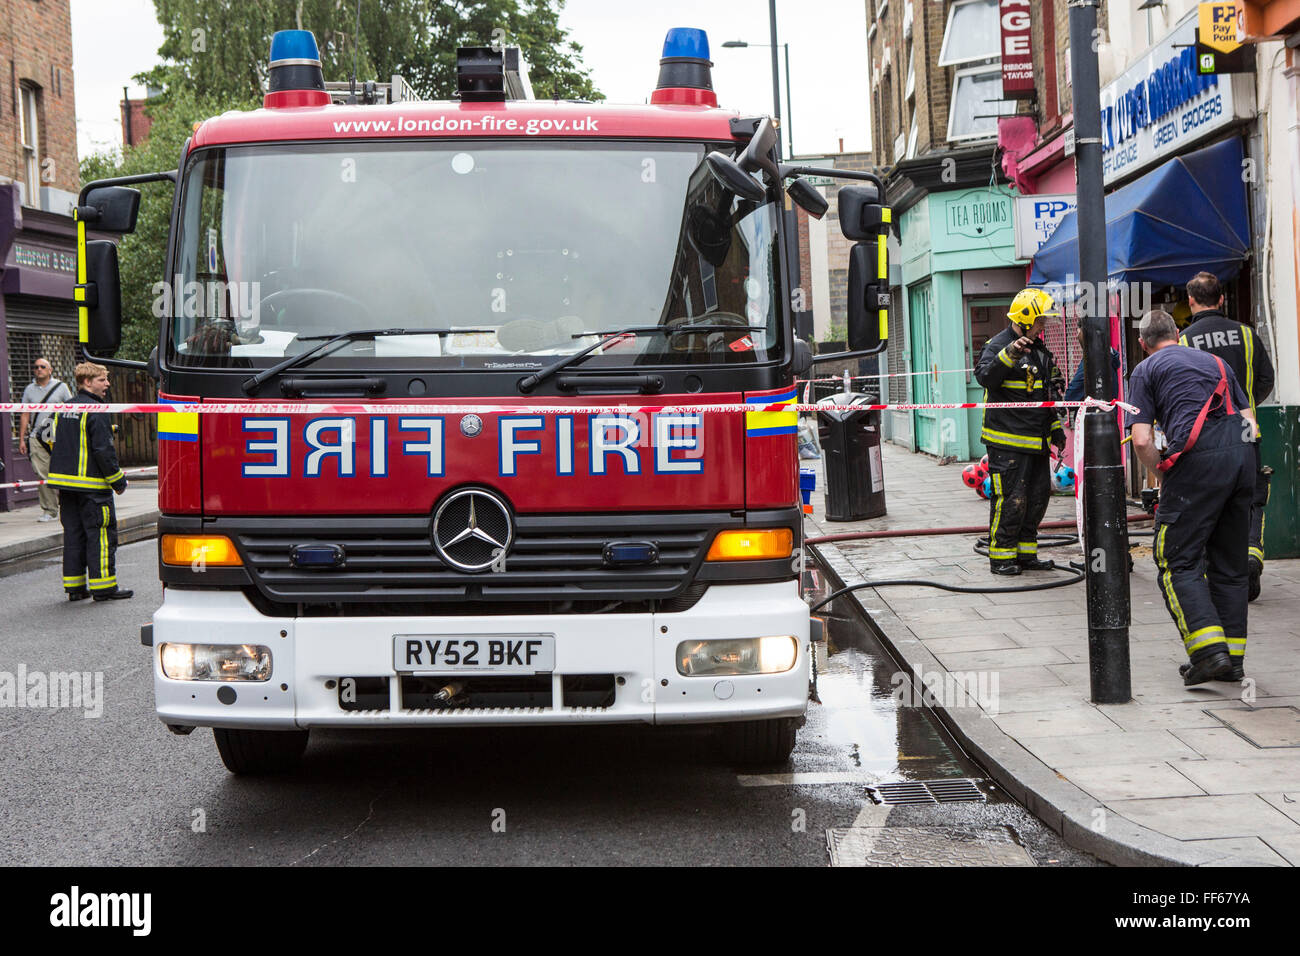 A London Fire Brigade unit responding to an emergency on Church Street, Stoke Newington, London, United Kingdom.  Firefighters have seal off the area with barricade tape to ensure public safety while they work. Stock Photo